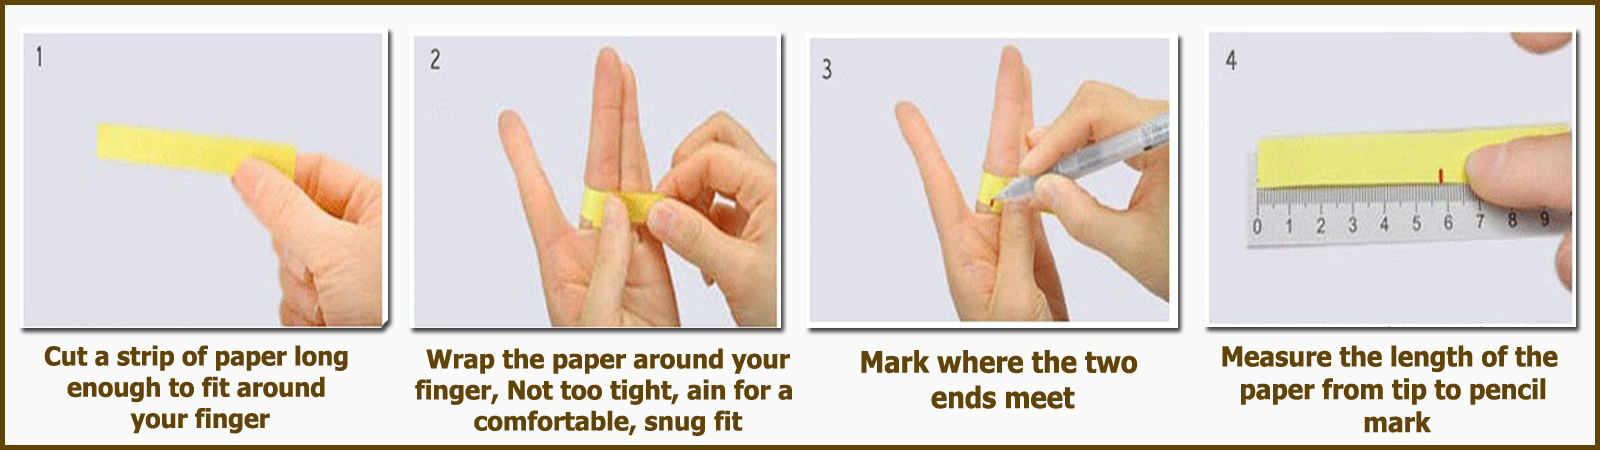 how to measurment ring size copy